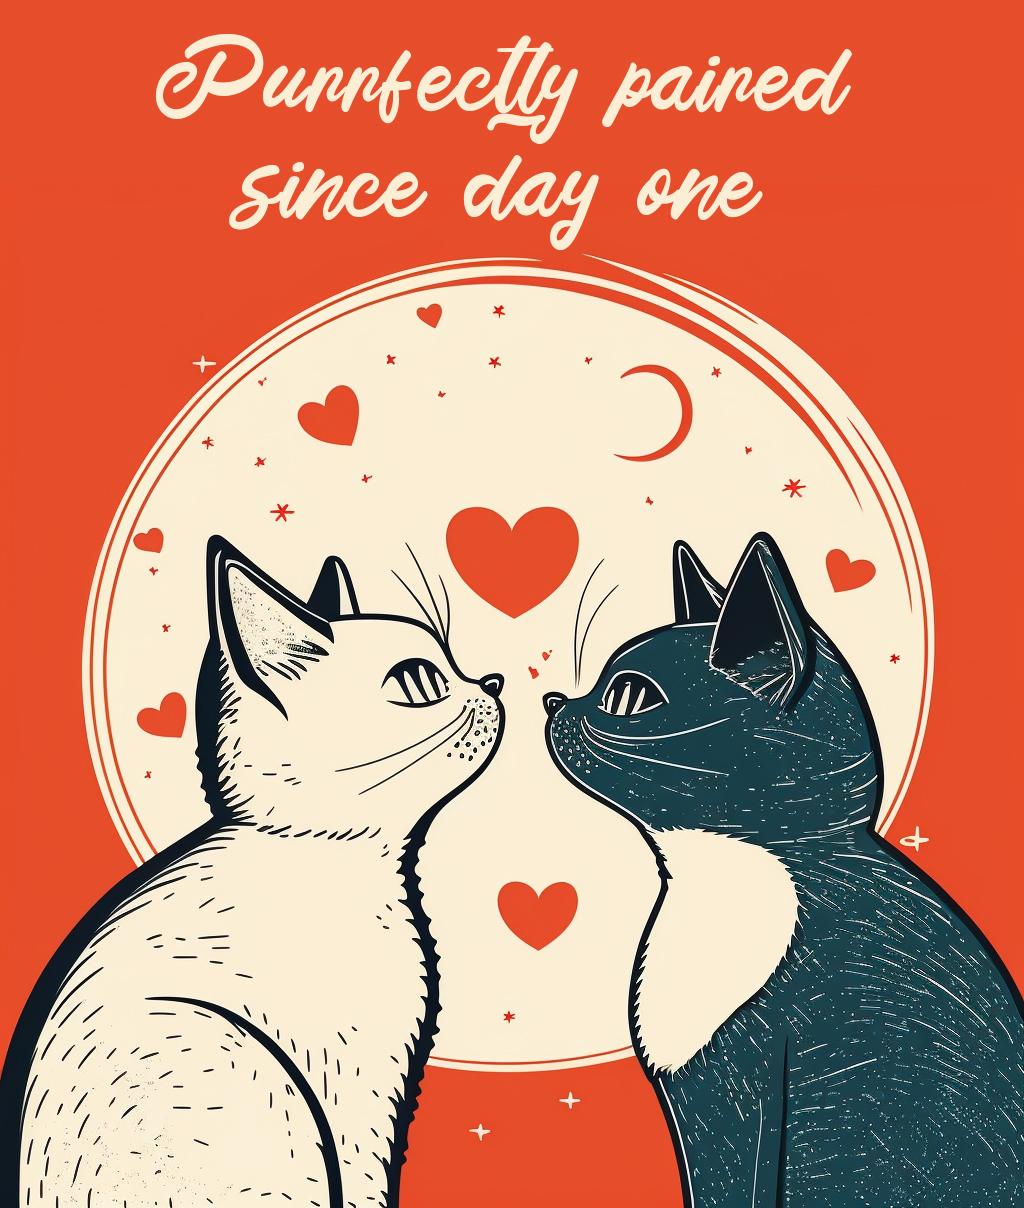 Purrfectly Paired: A Valentine's Day Card NFT cruzo